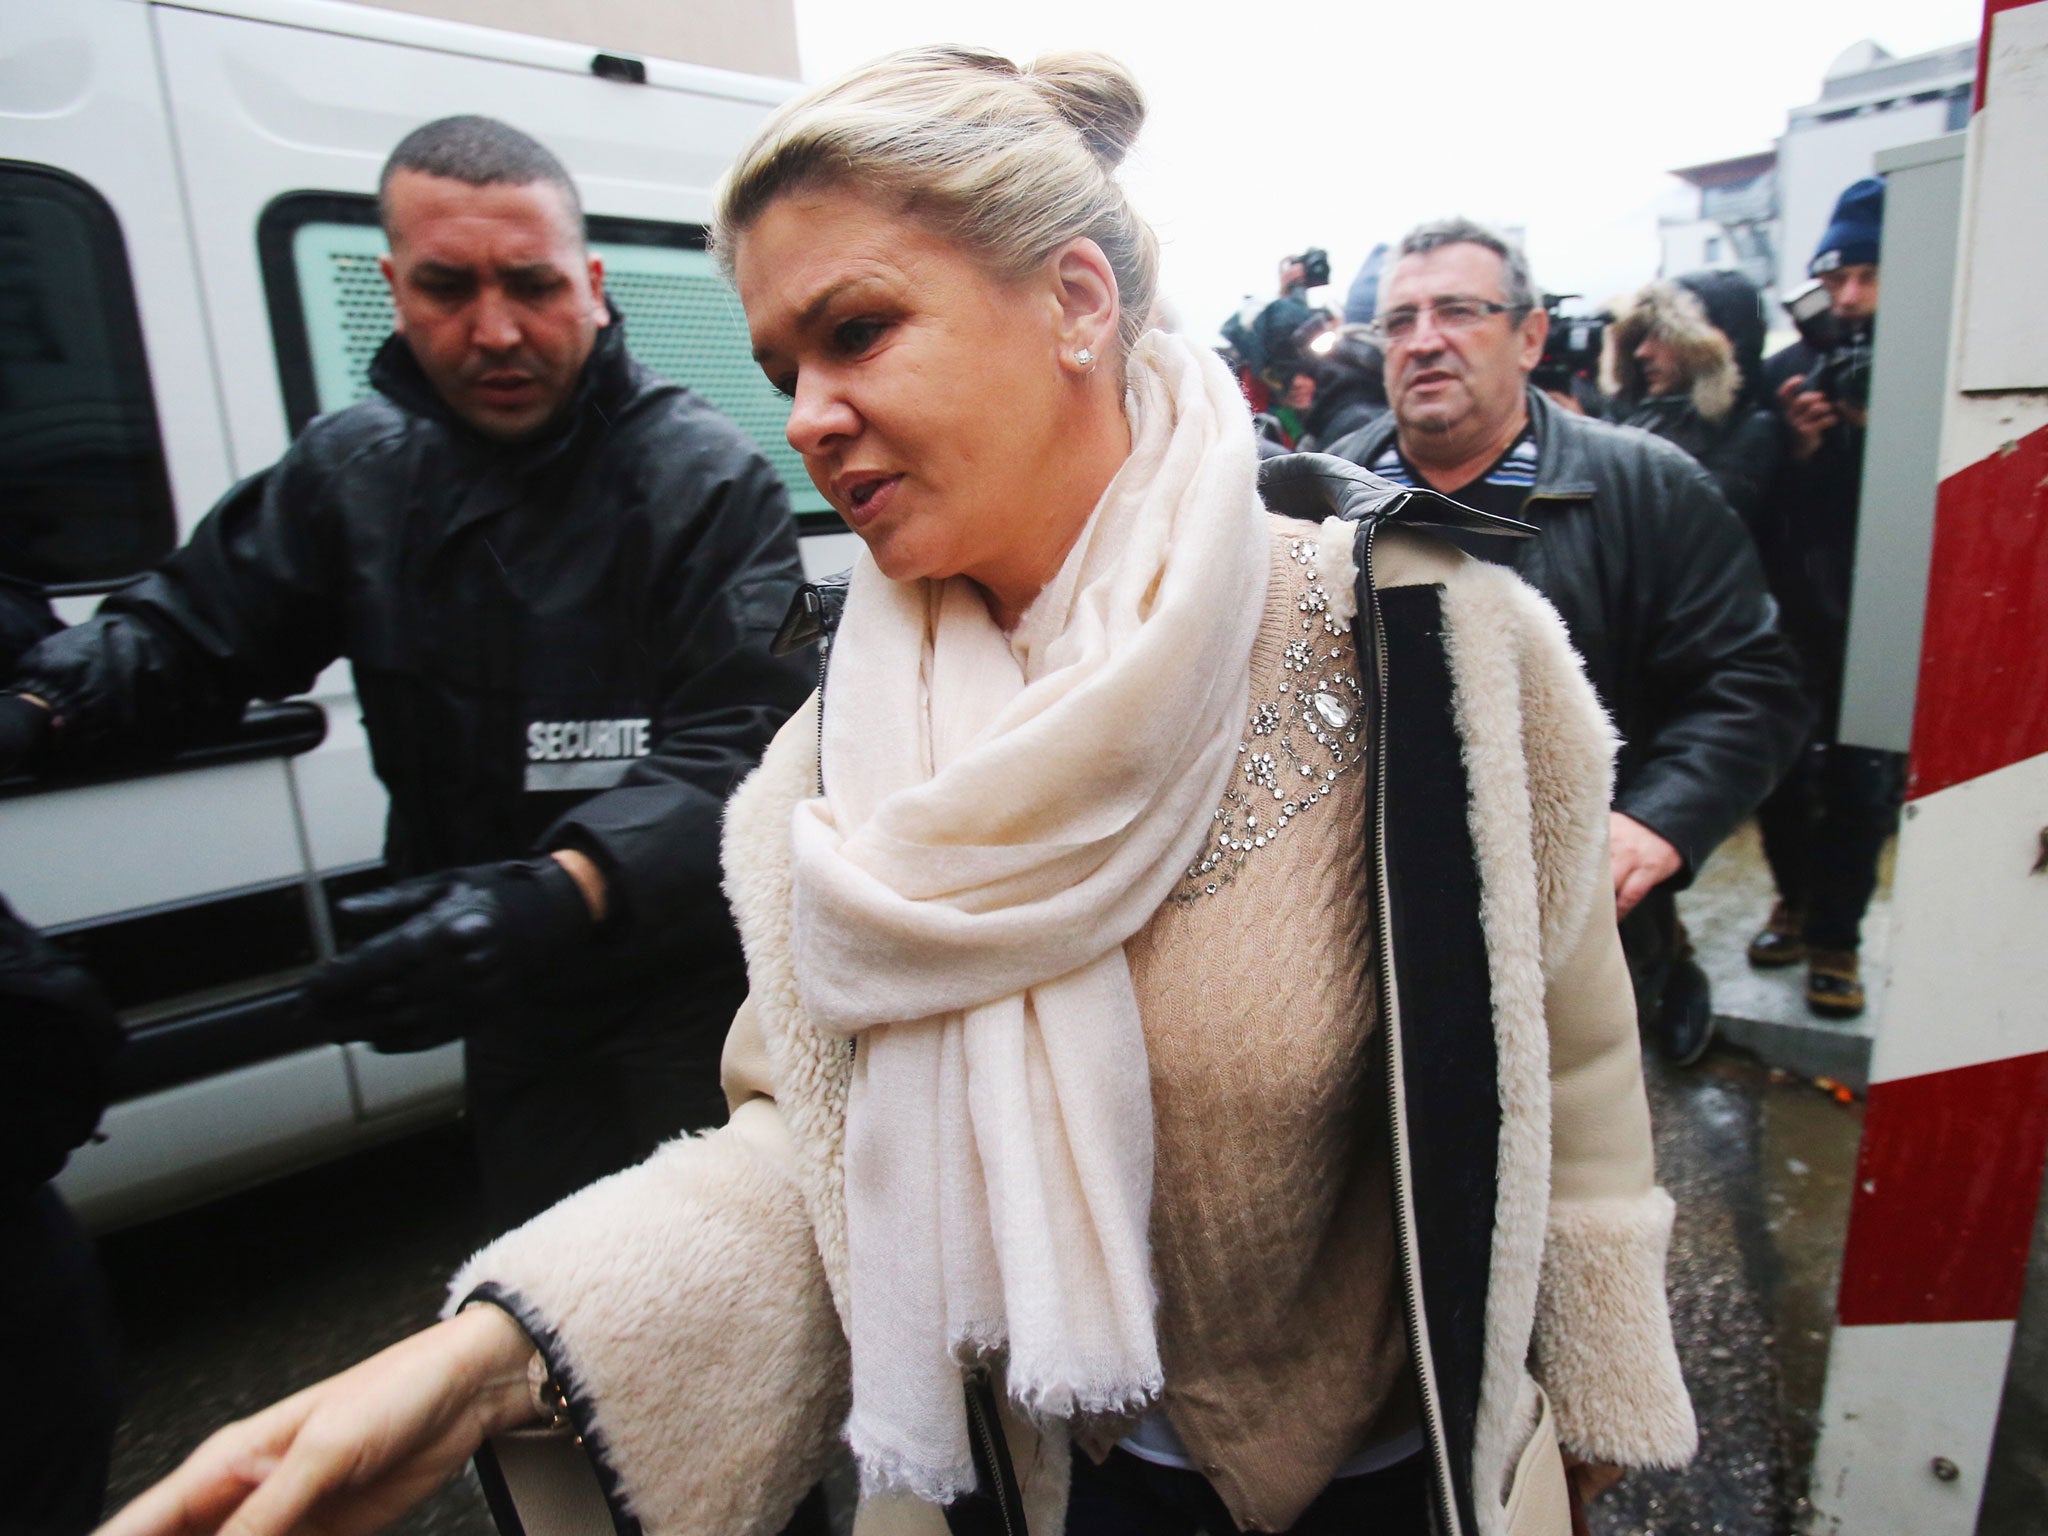 Corinna Schumacher, wife of the former racing driver Michael Schumacher, arrives at the Grenoble University Hospital to continue a bedside vigil for her husband who is recovering from severe head injuries sustained in a skiing accident